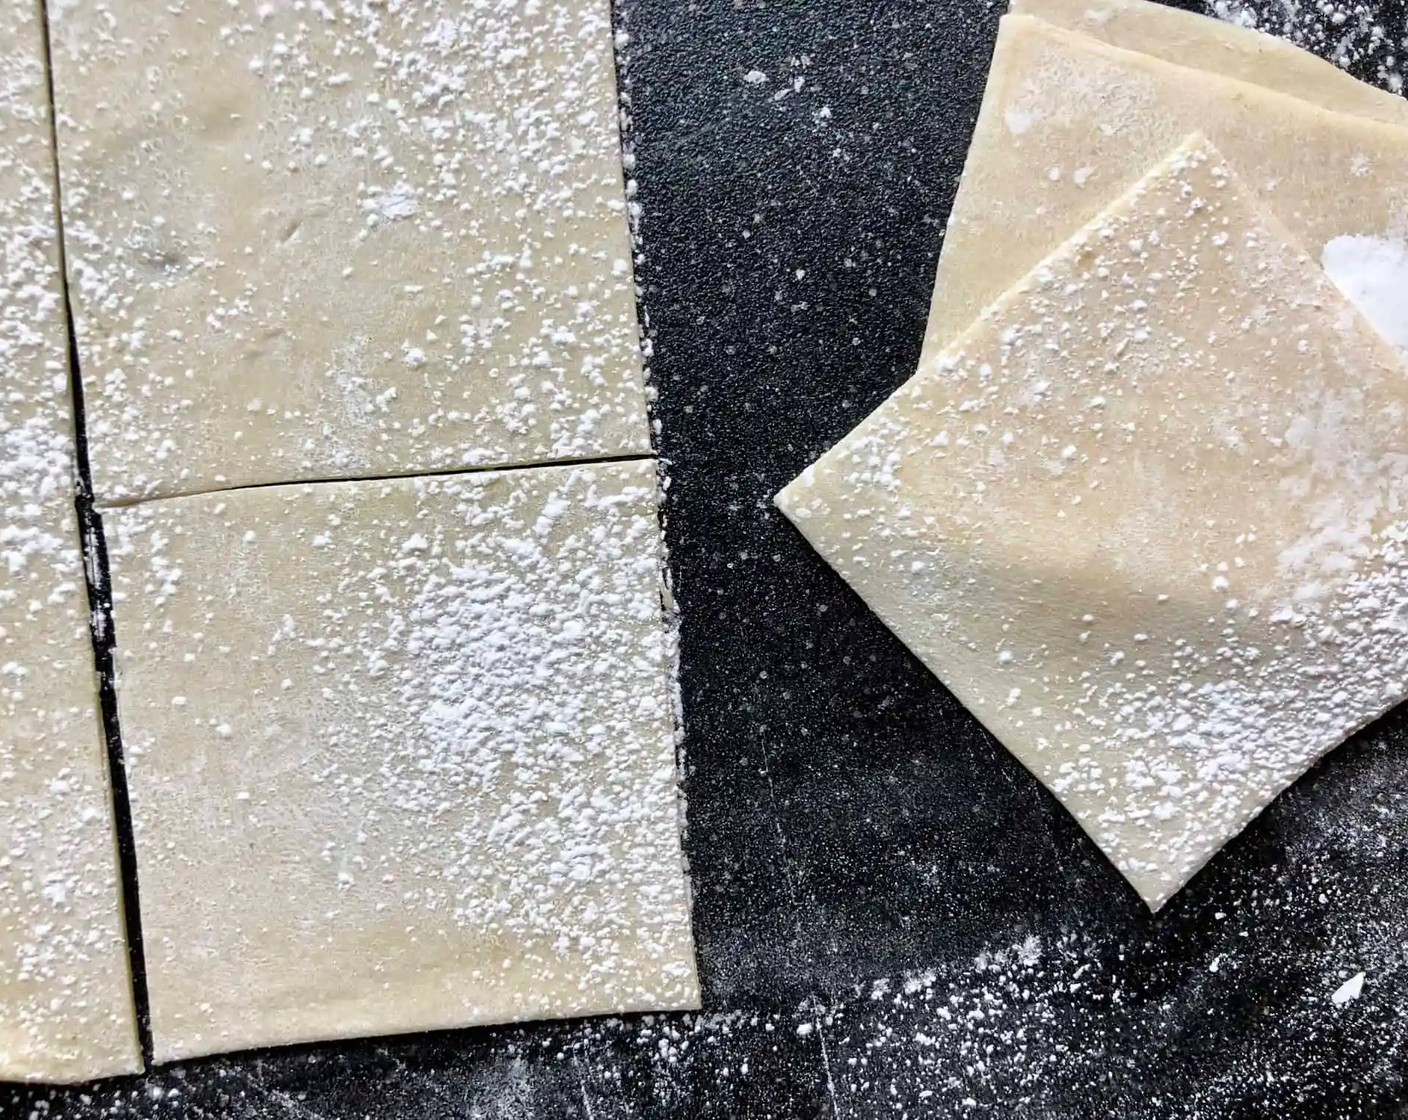 step 8 Cut the sheet into your desired shapes. 5-inch squares are perfect for egg rolls. 3-inch squares or circles are great for wontons or dumplings. Repeat with the remaining dough. Use the wonton wrappers immediately or freeze them for future use.